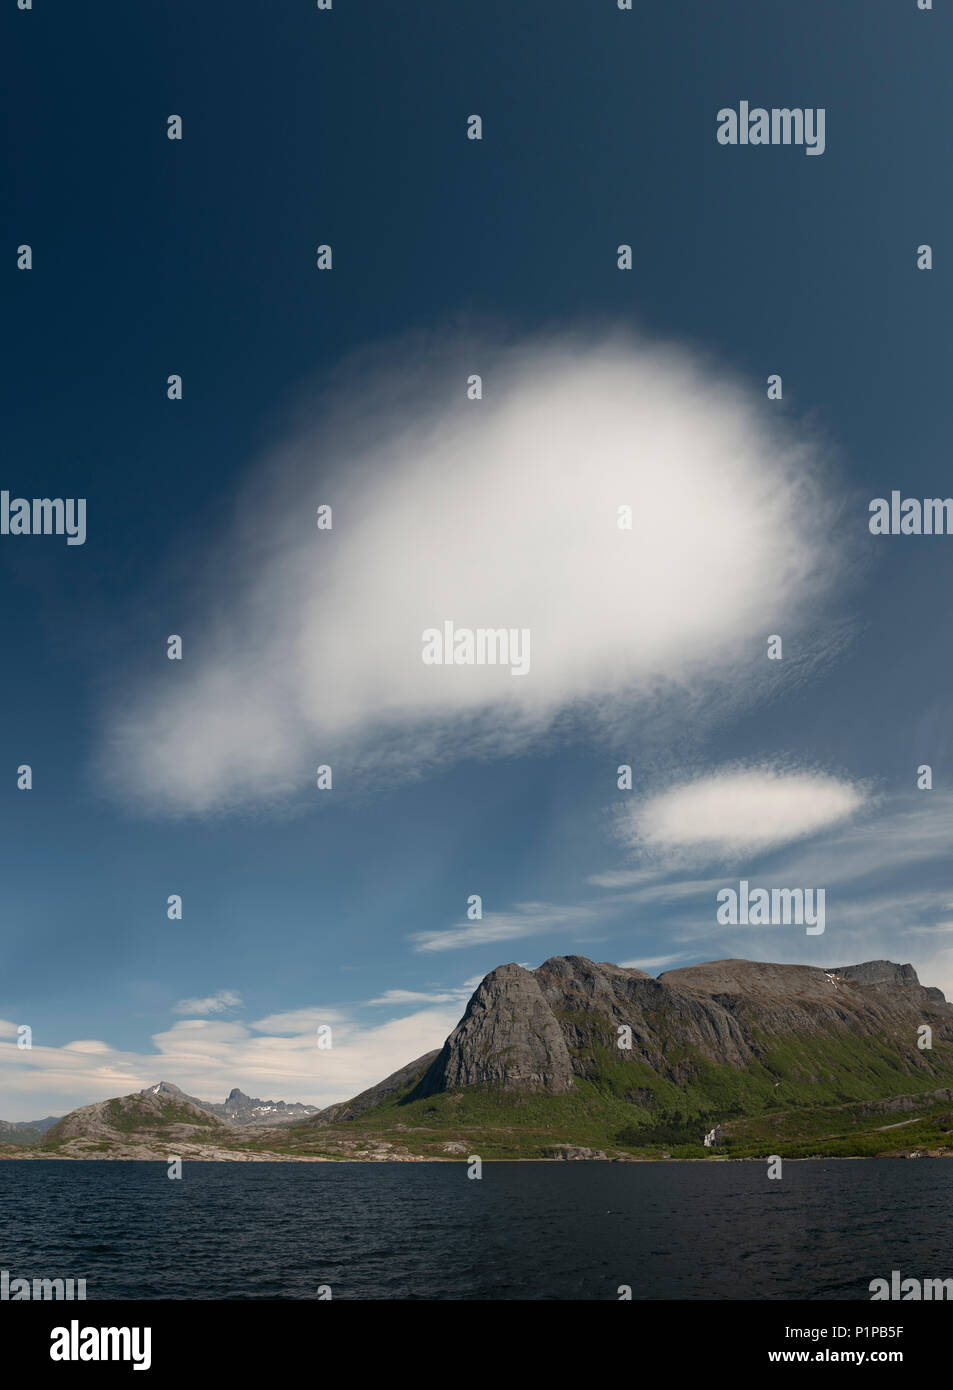 High altitude clouds in Norway Stock Photo